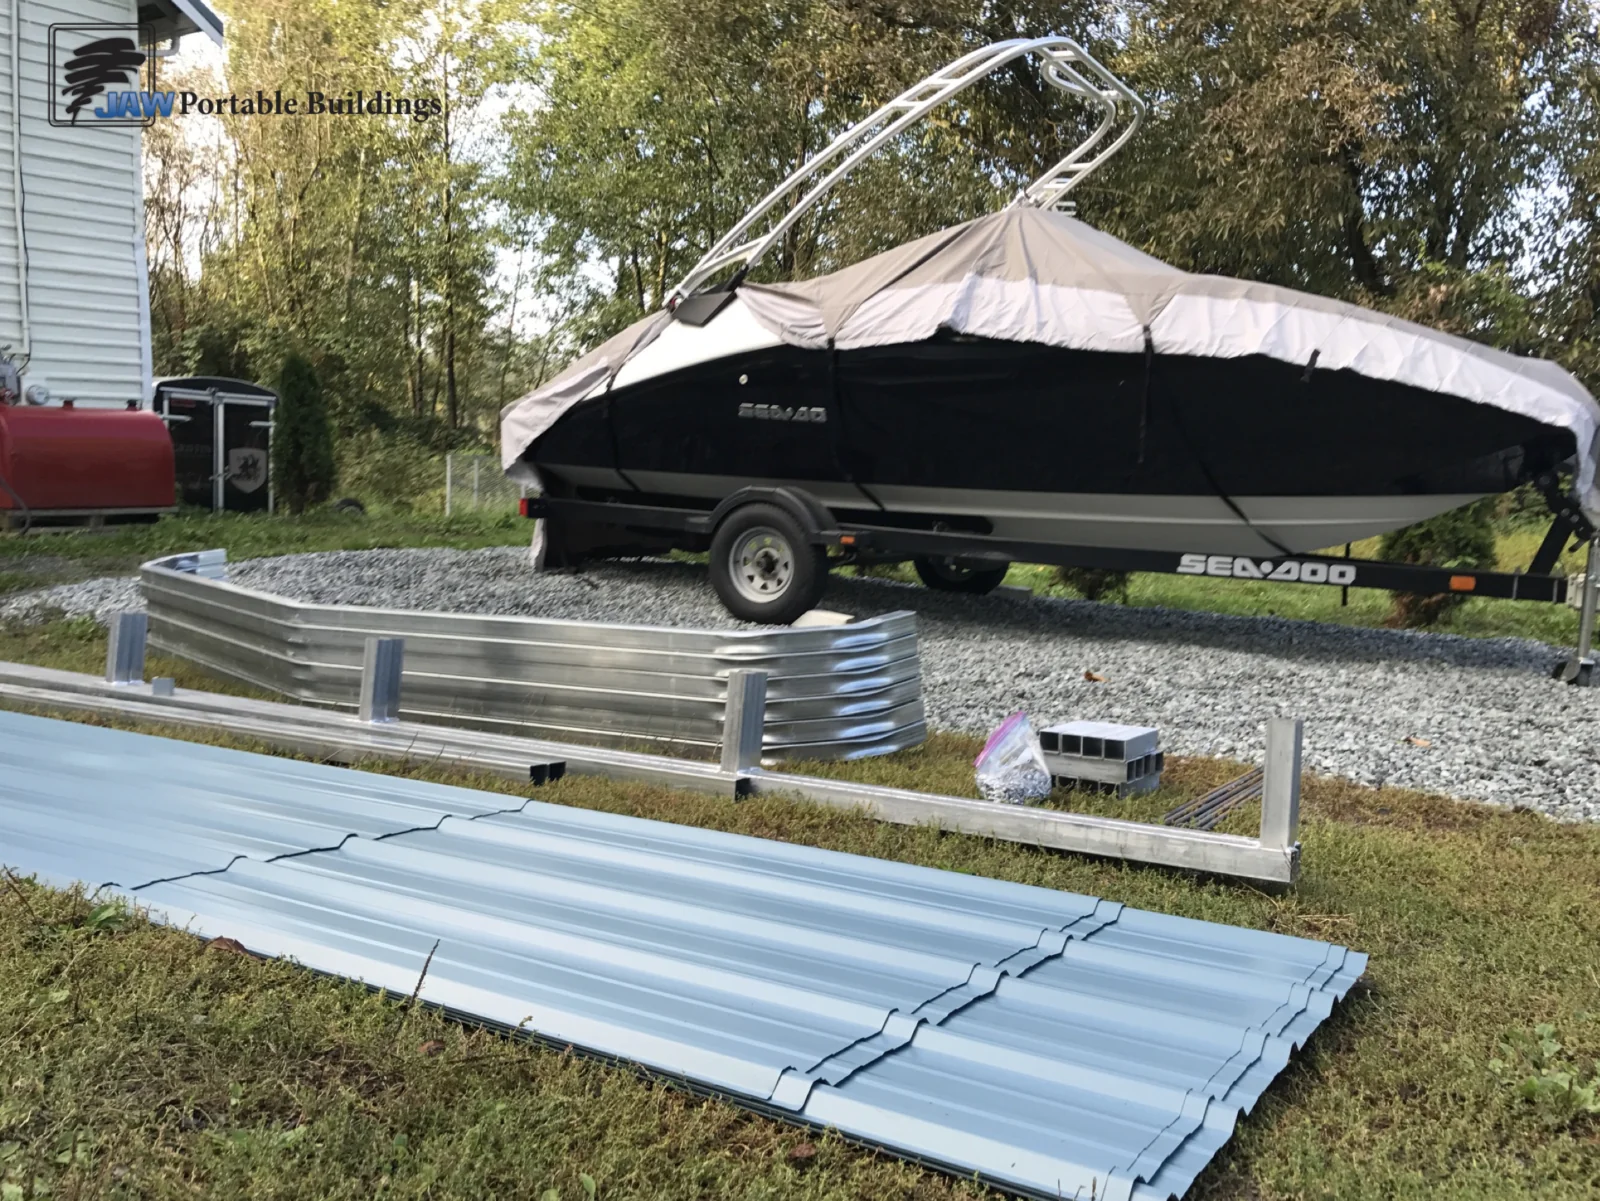 Metal Portable Boat Shelters - JAW Portable Buildings